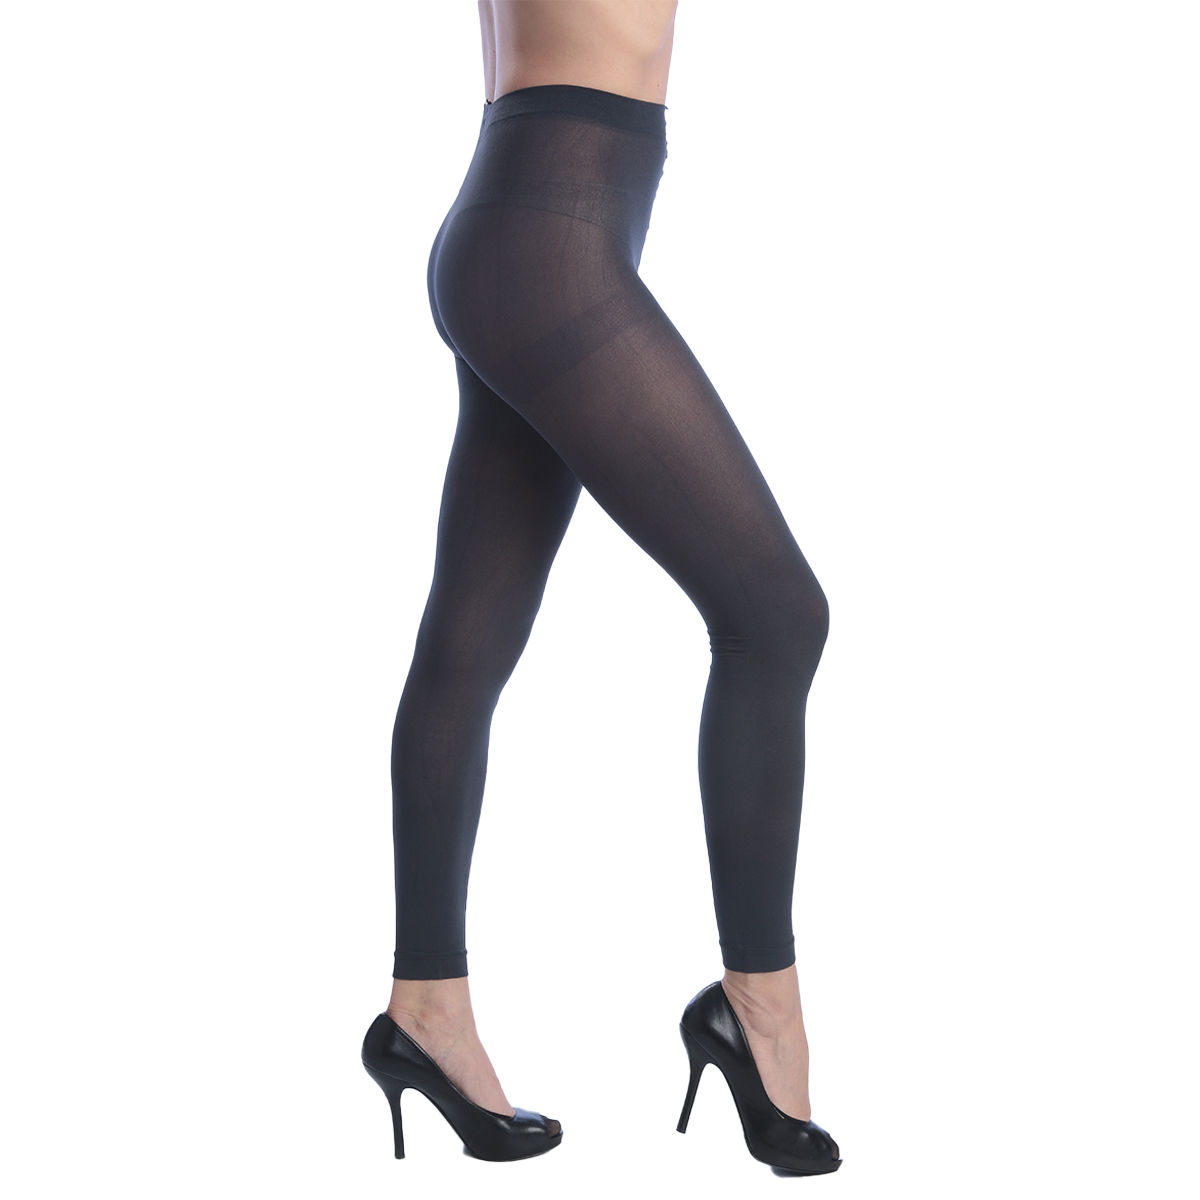 Bulk Women's Opaque Footless, Tights, Charcoal, Plus Size - DollarDays